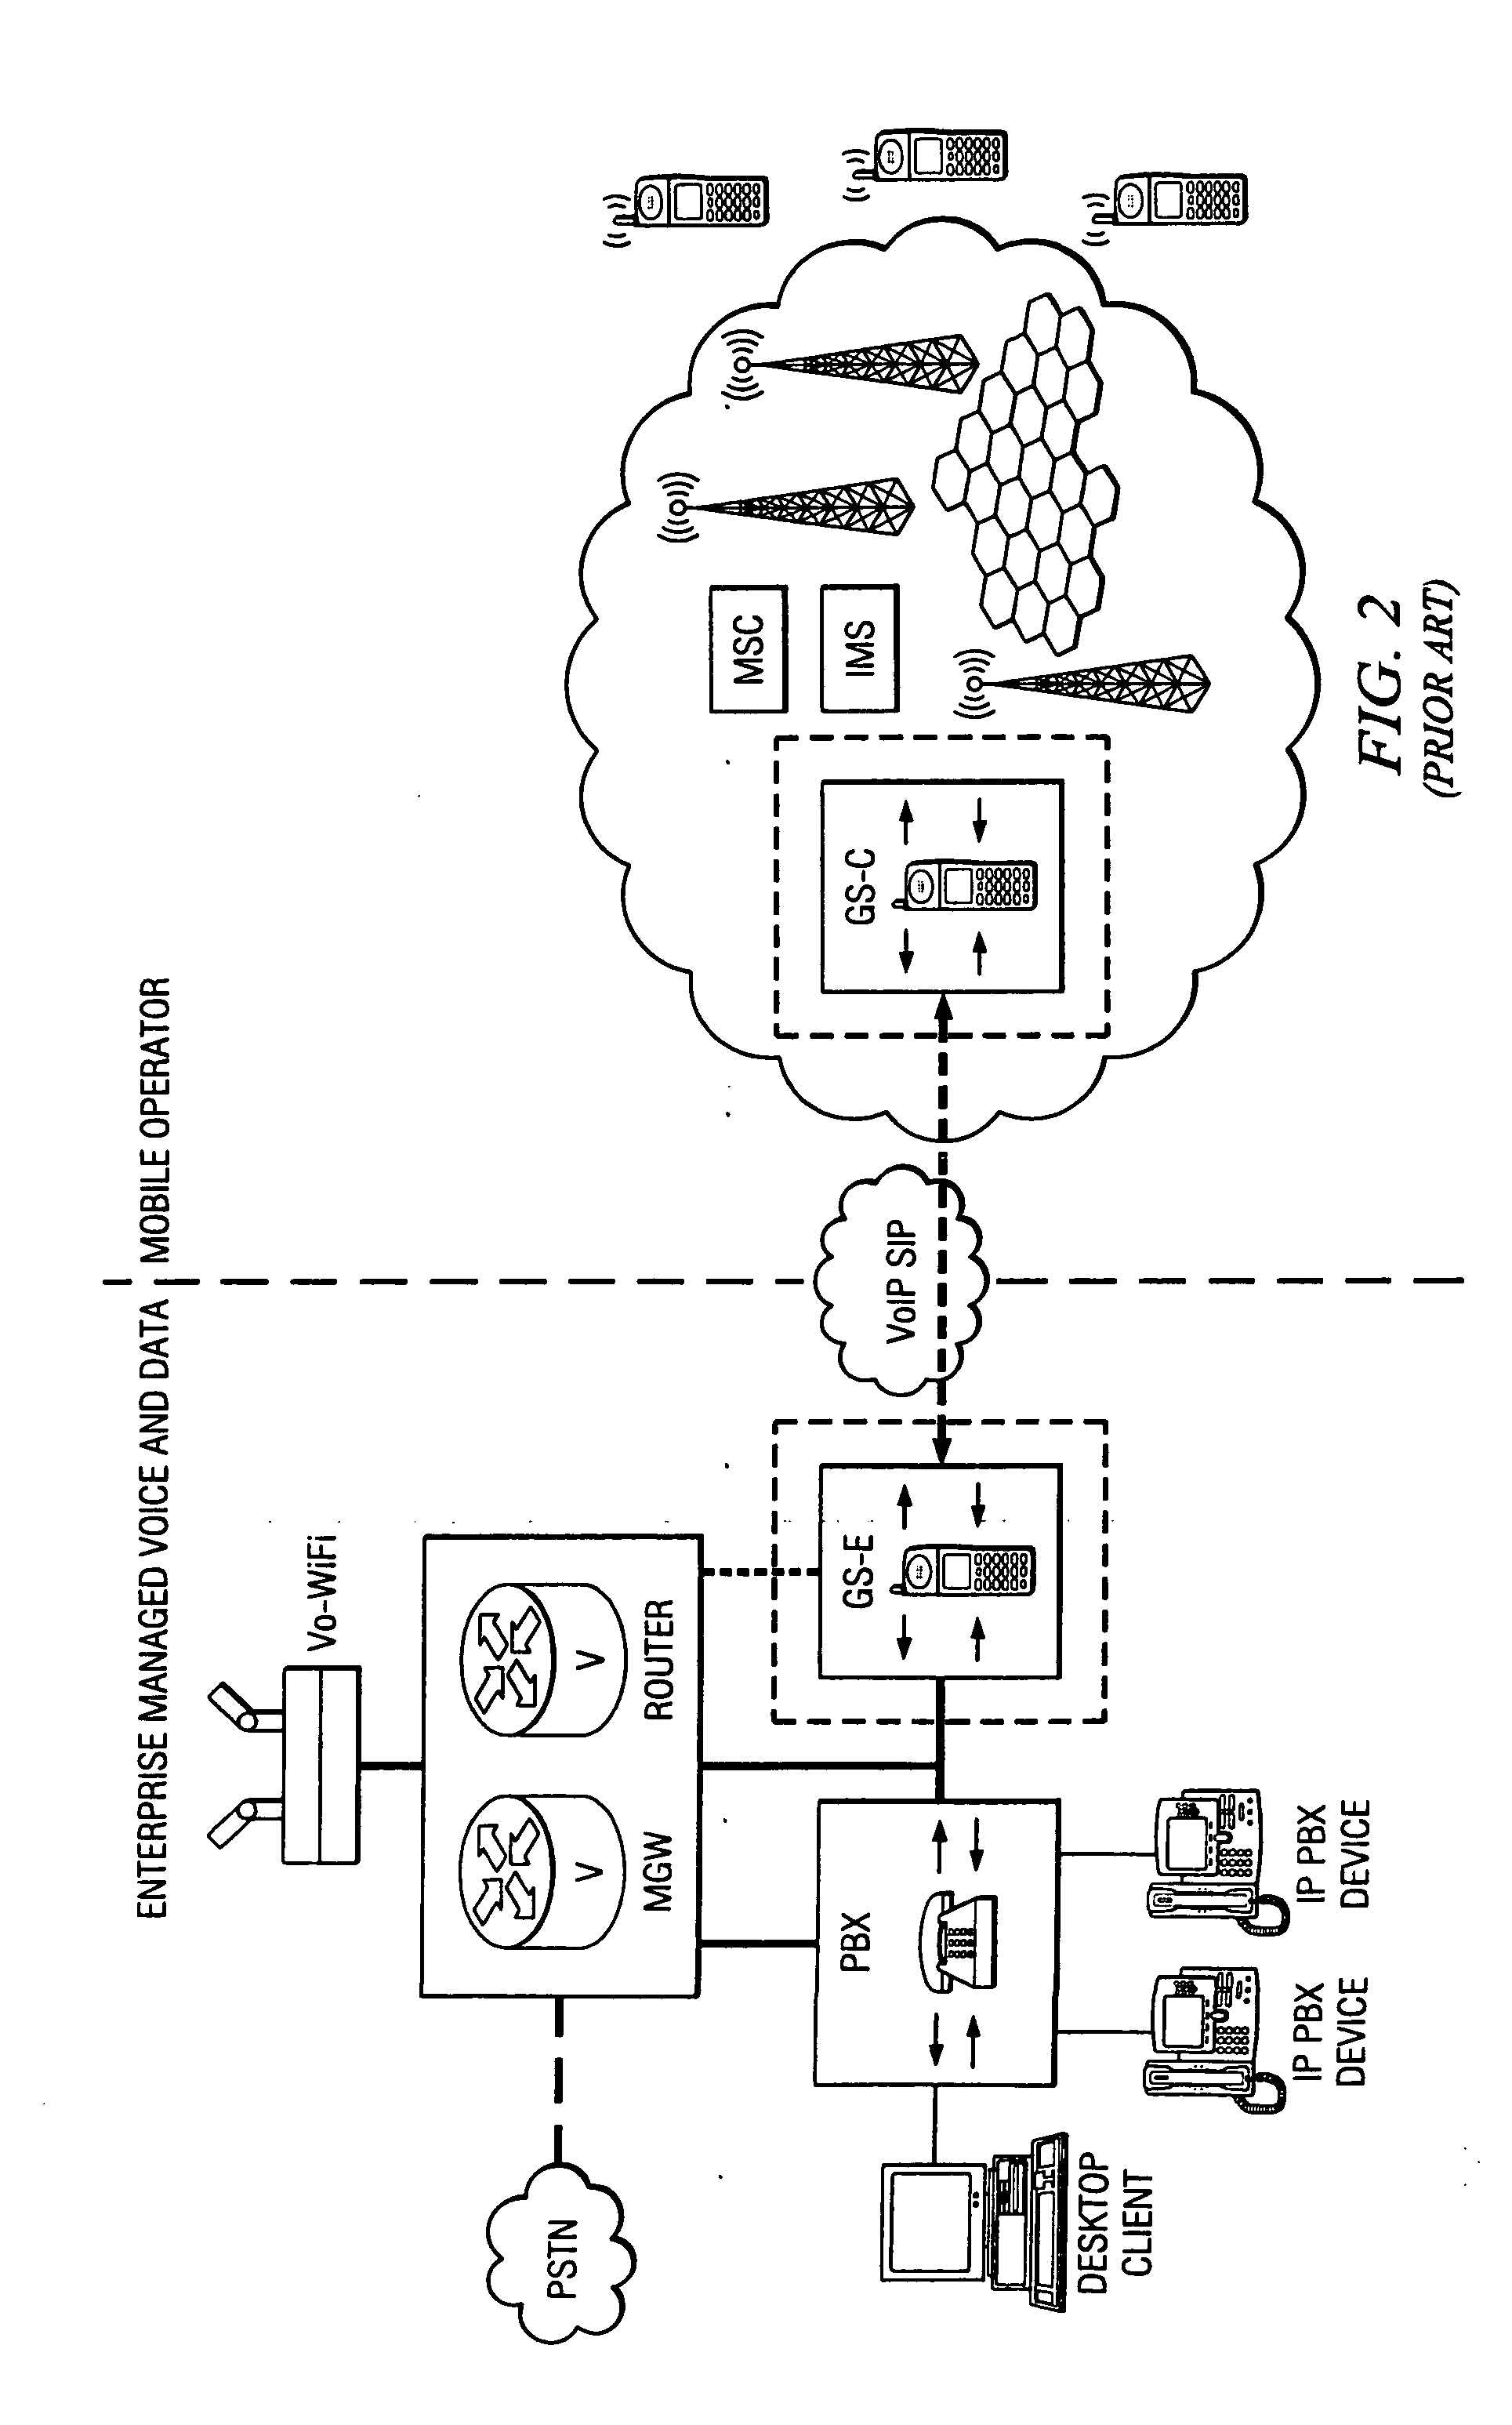 System and method for enabling call originations using SMS and hotline capabilities